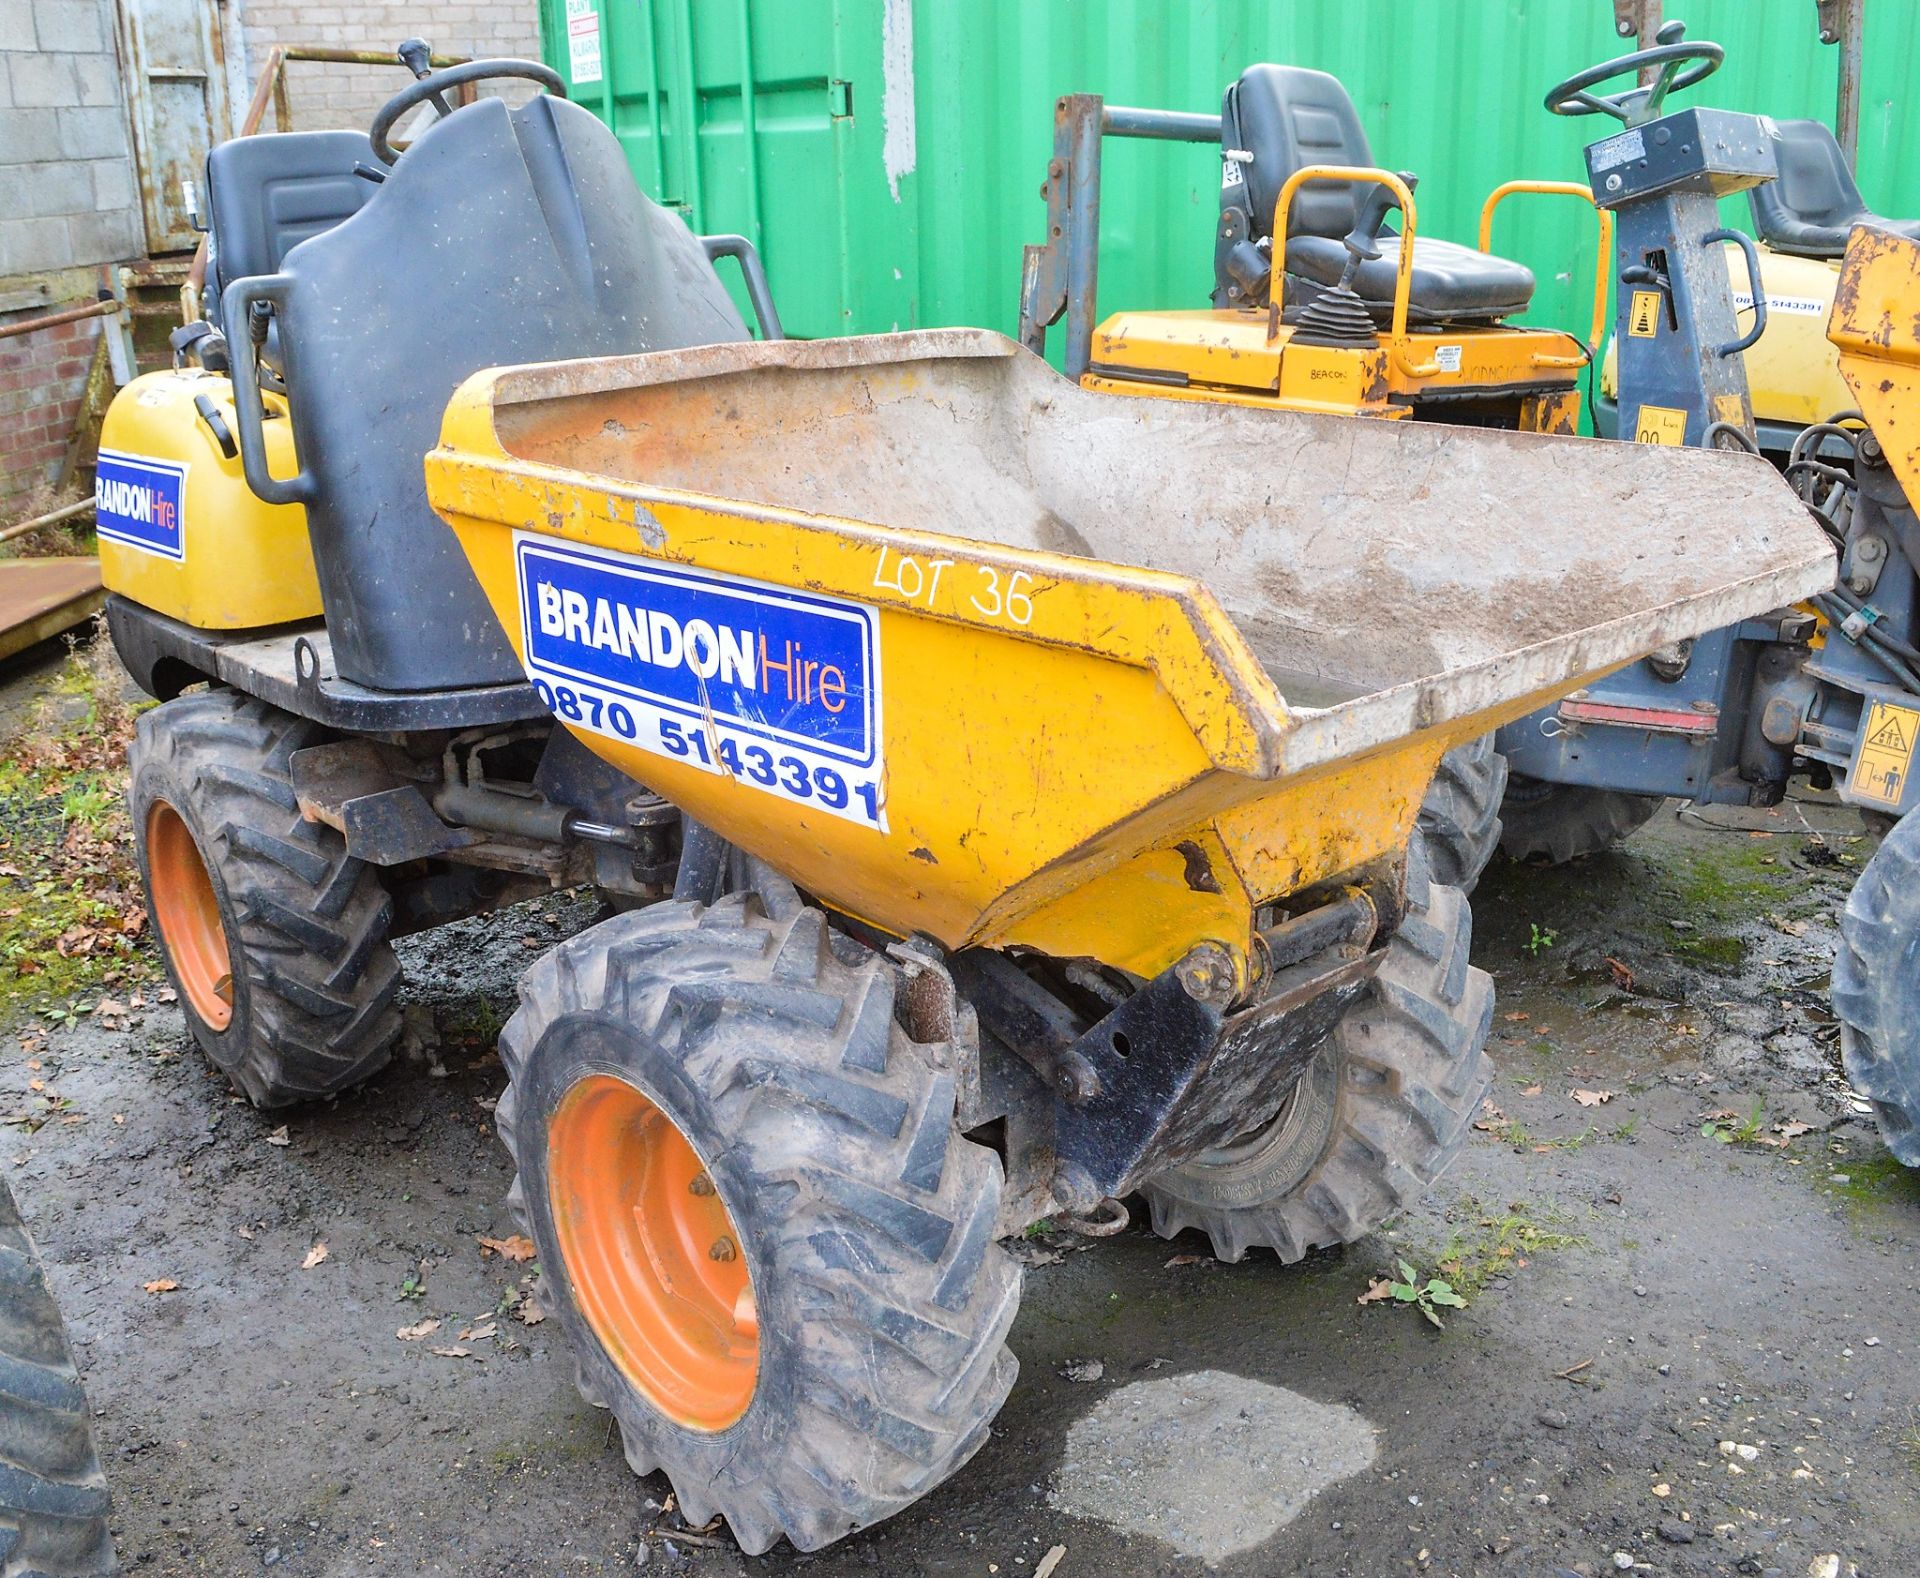 Lifton 850 hi tip dumper Year: 2002 S/N: 382 Recorded Hours: 1881 MG55 ** Machine does not start and